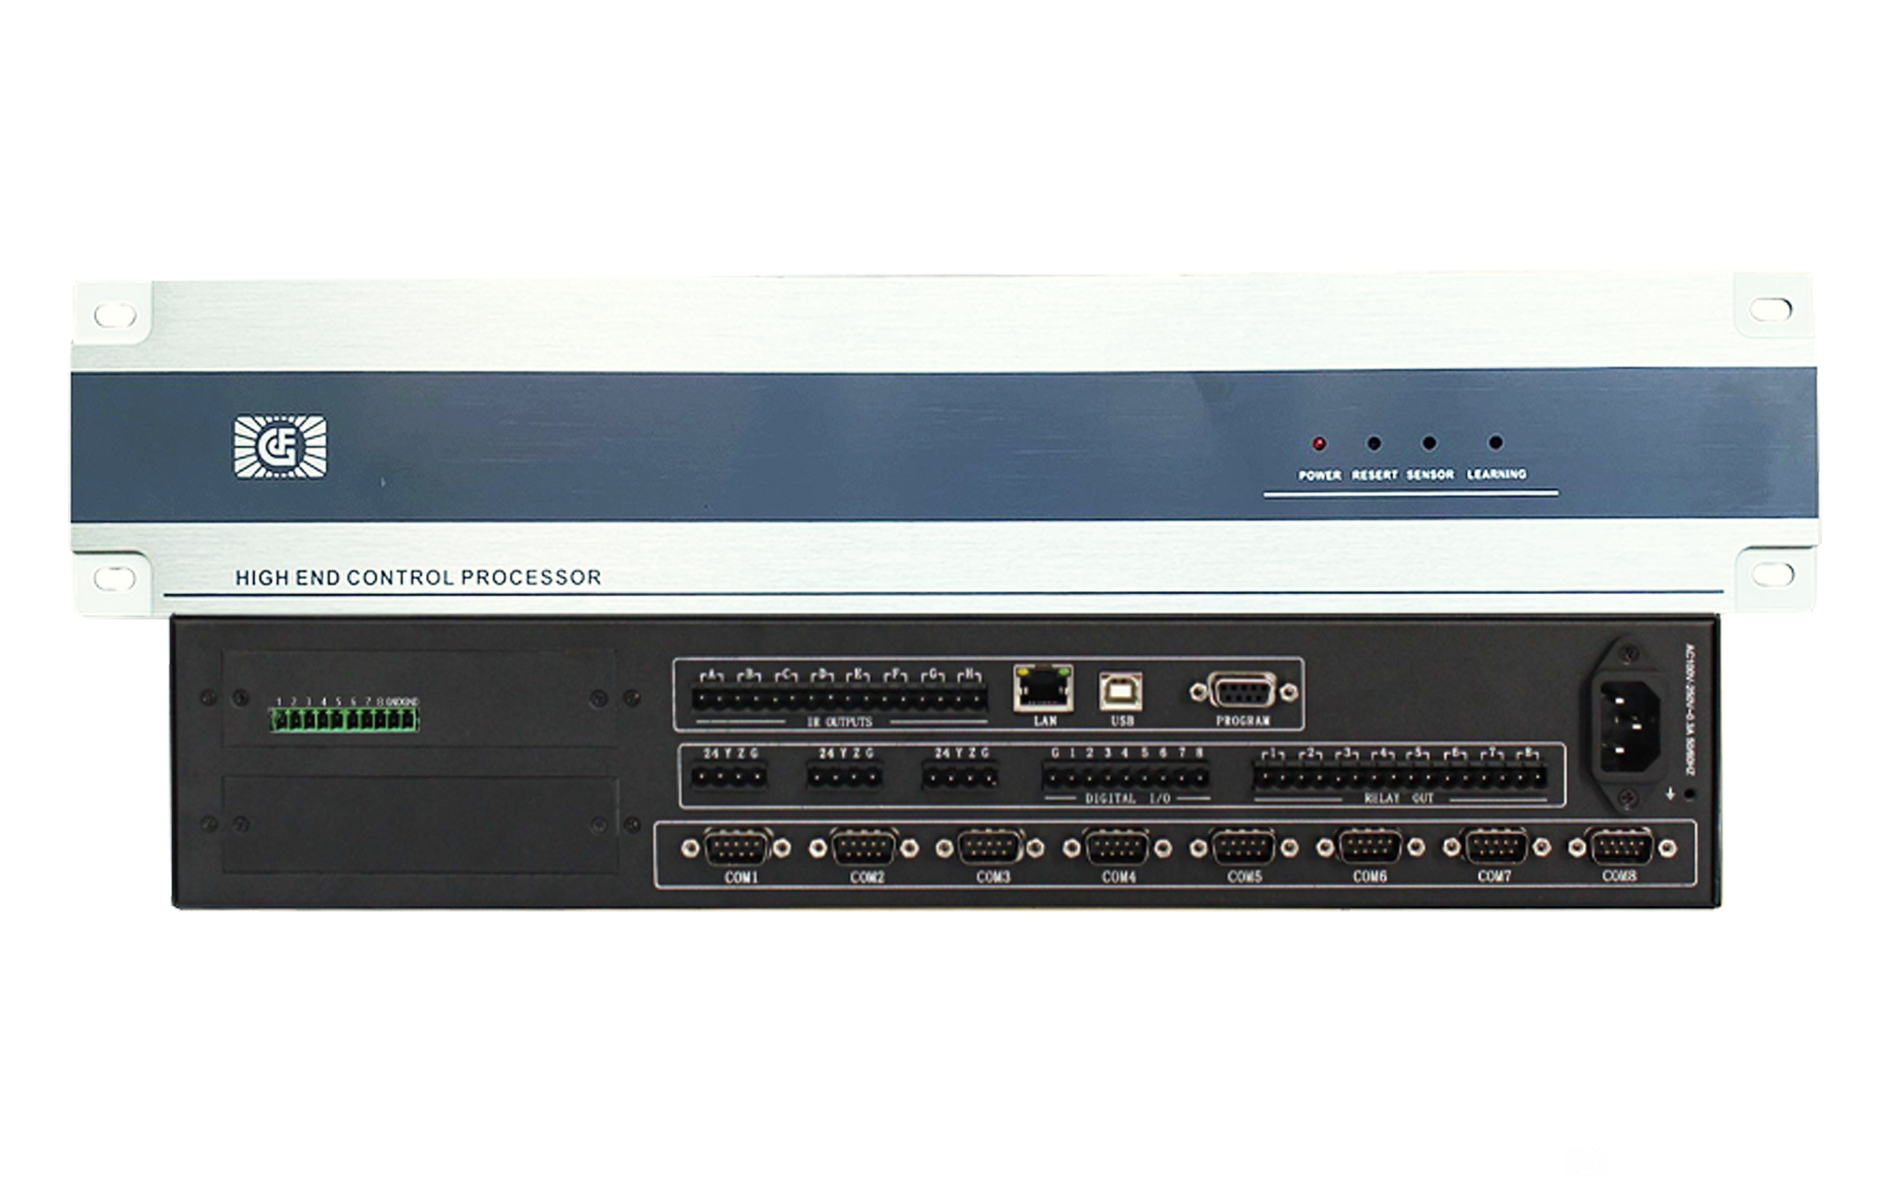 16-channel programmable network central control ho